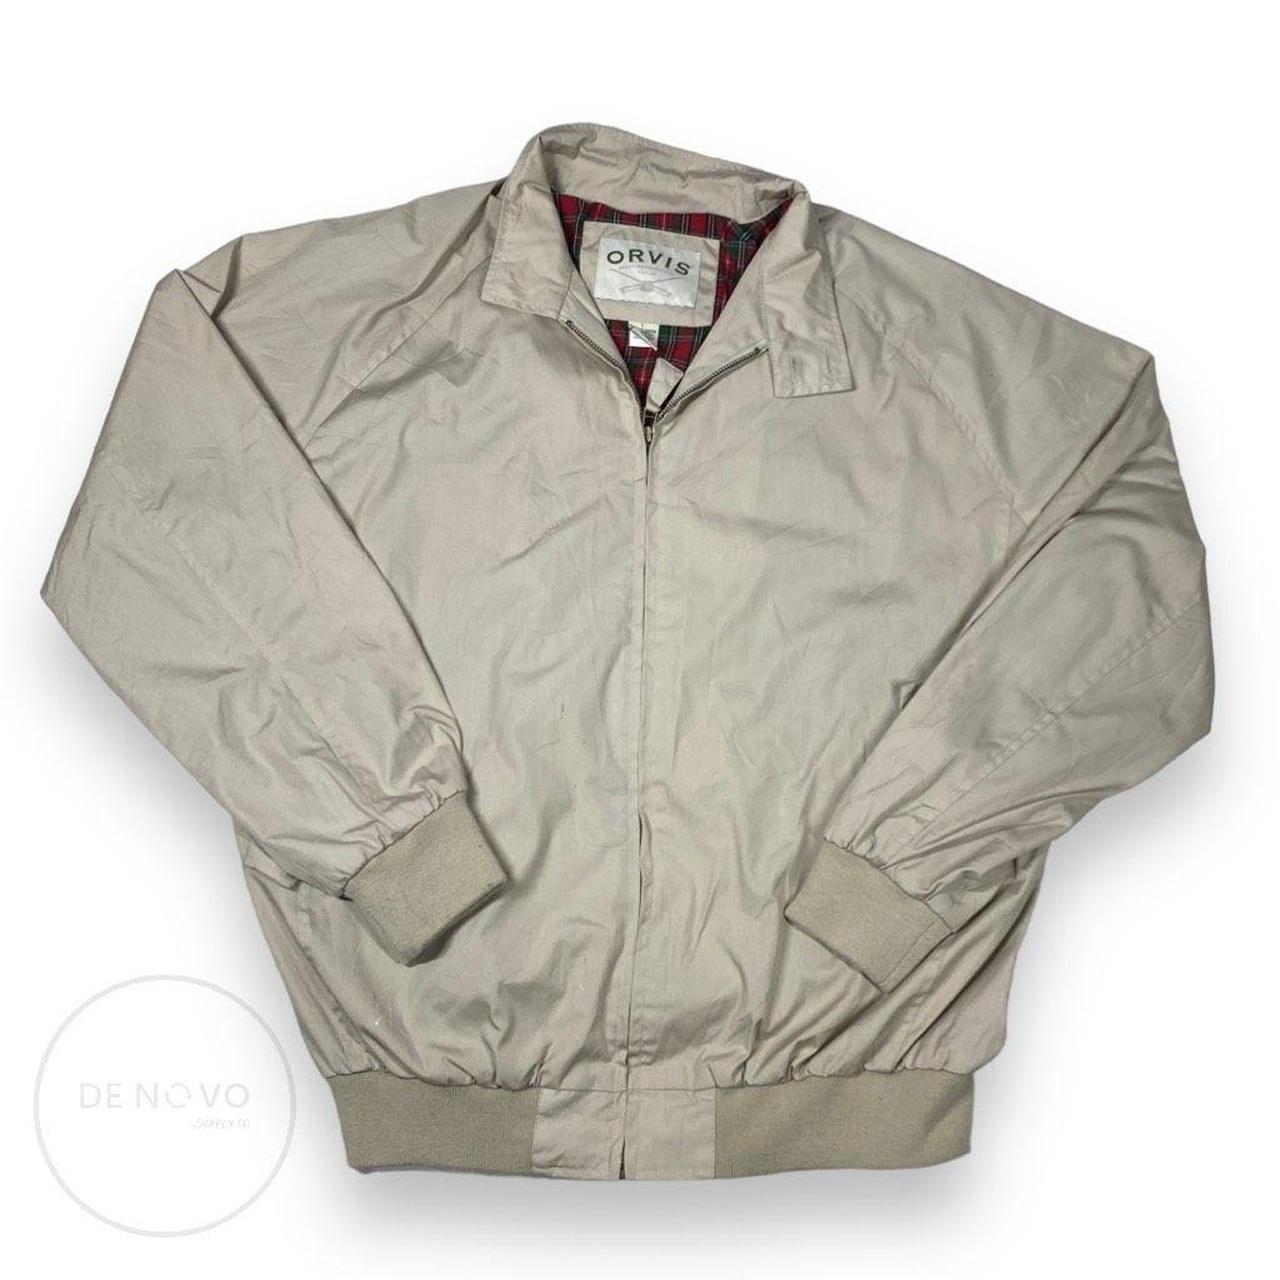 UP FOR SALE IS a preowned Orvis Men's Large Full Zip - Depop